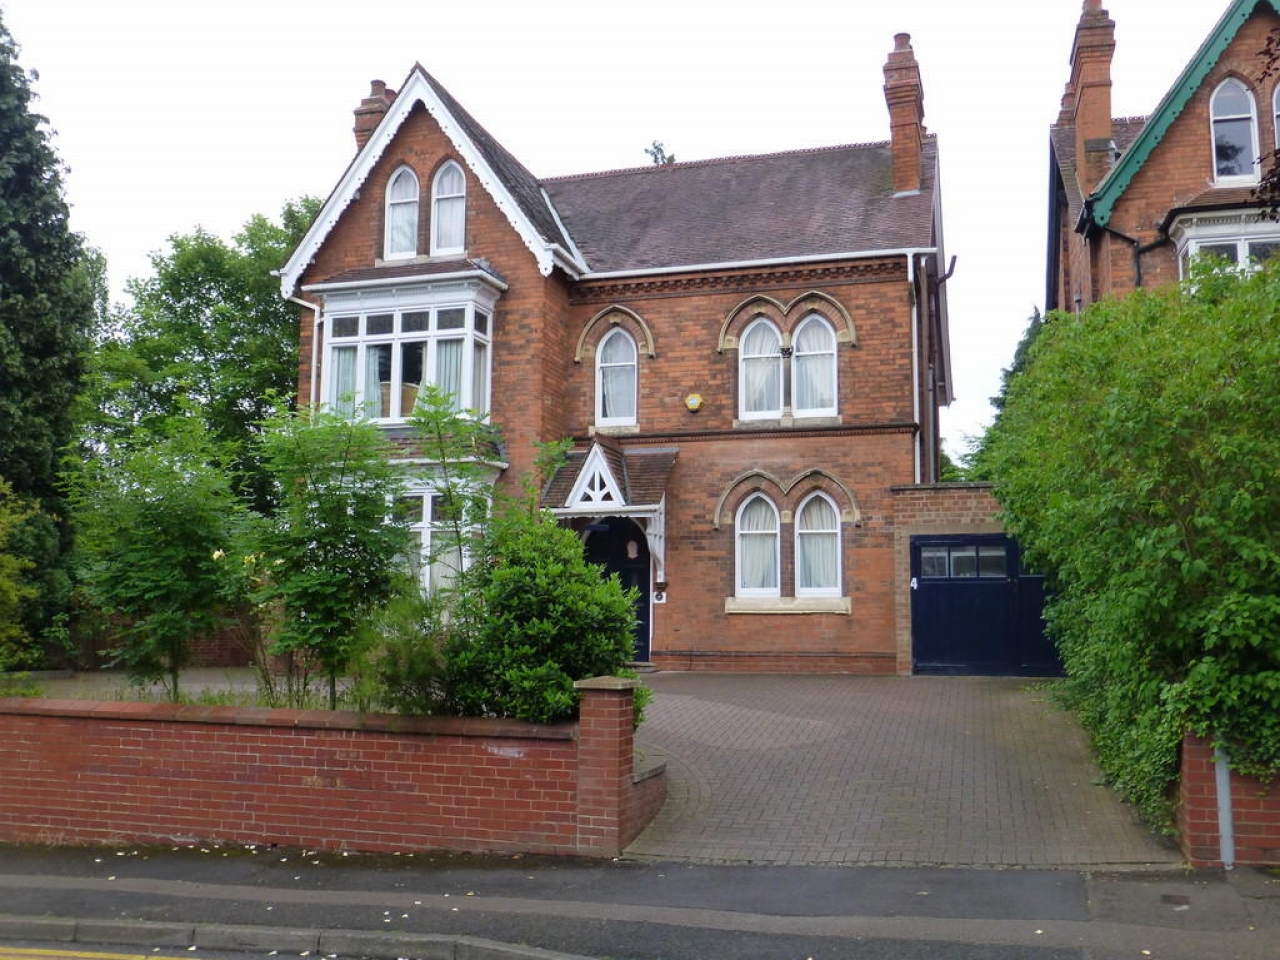 5 bedroom detached house SSTC in Solihull - photograph 1.